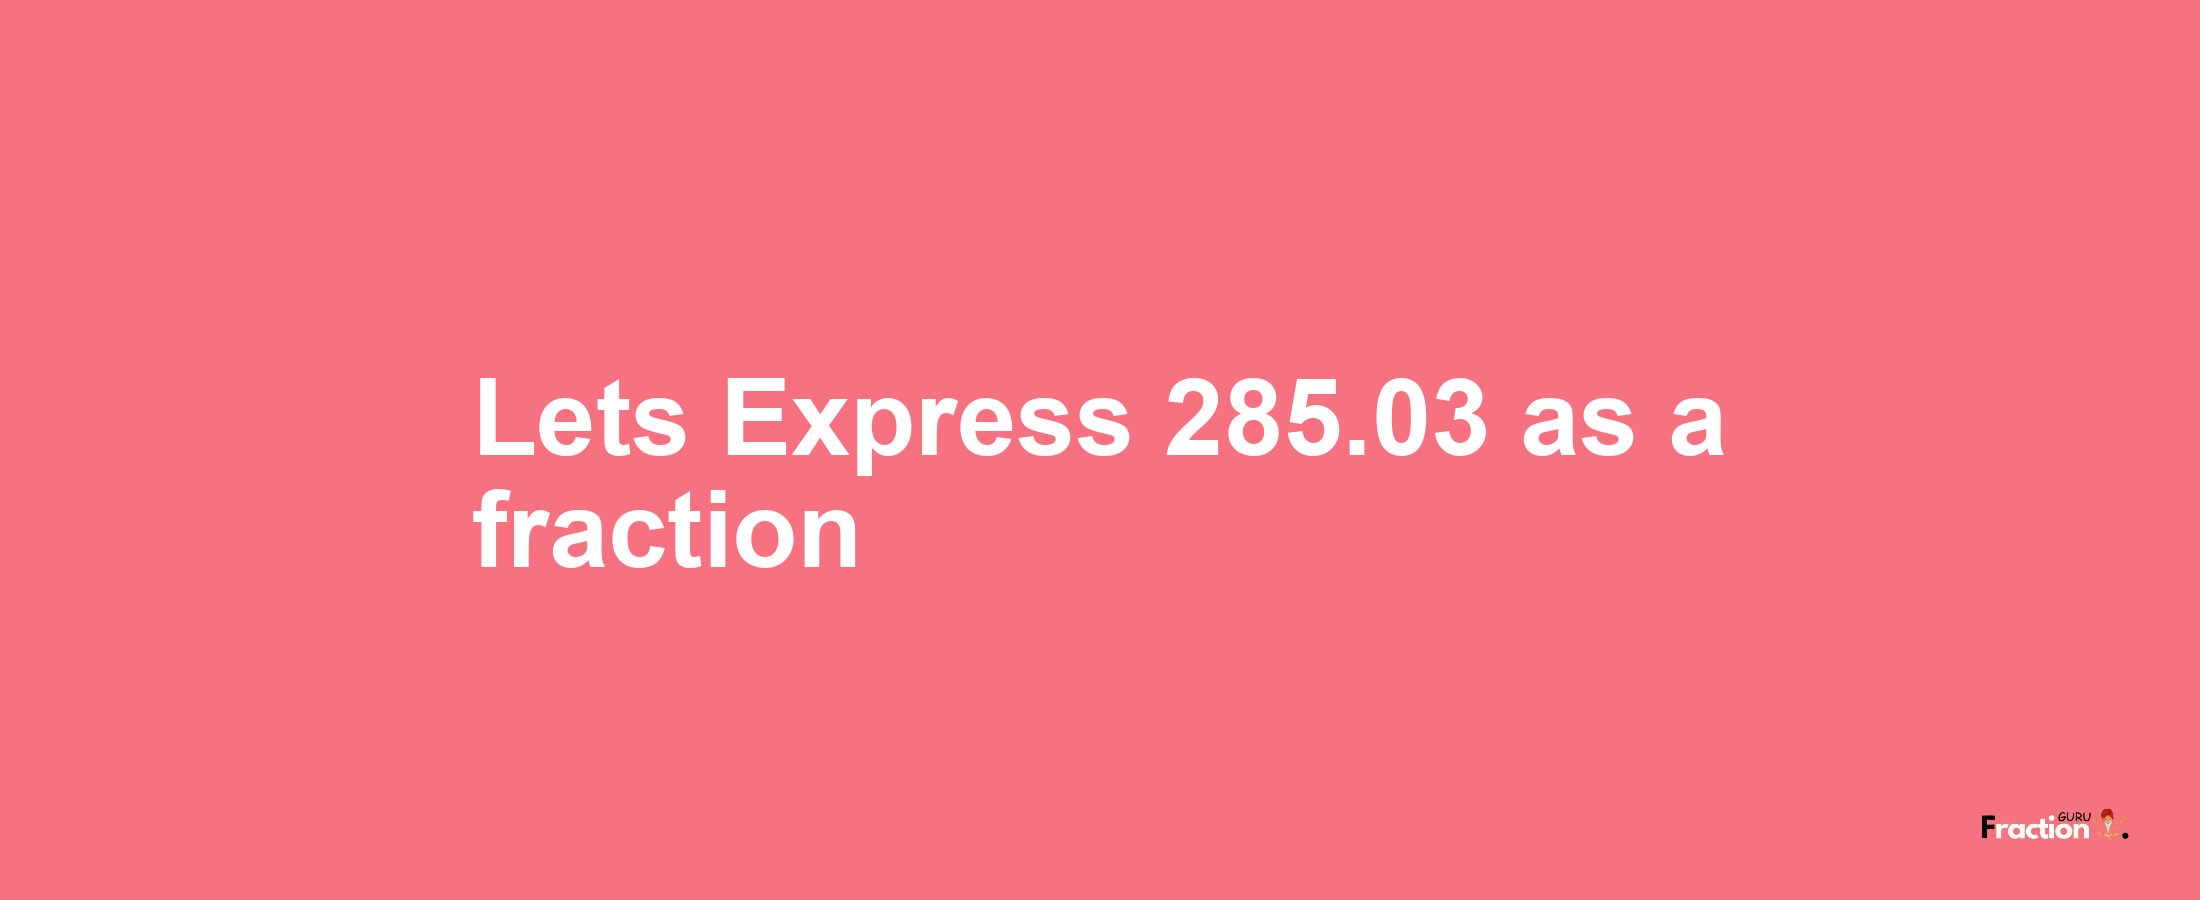 Lets Express 285.03 as afraction